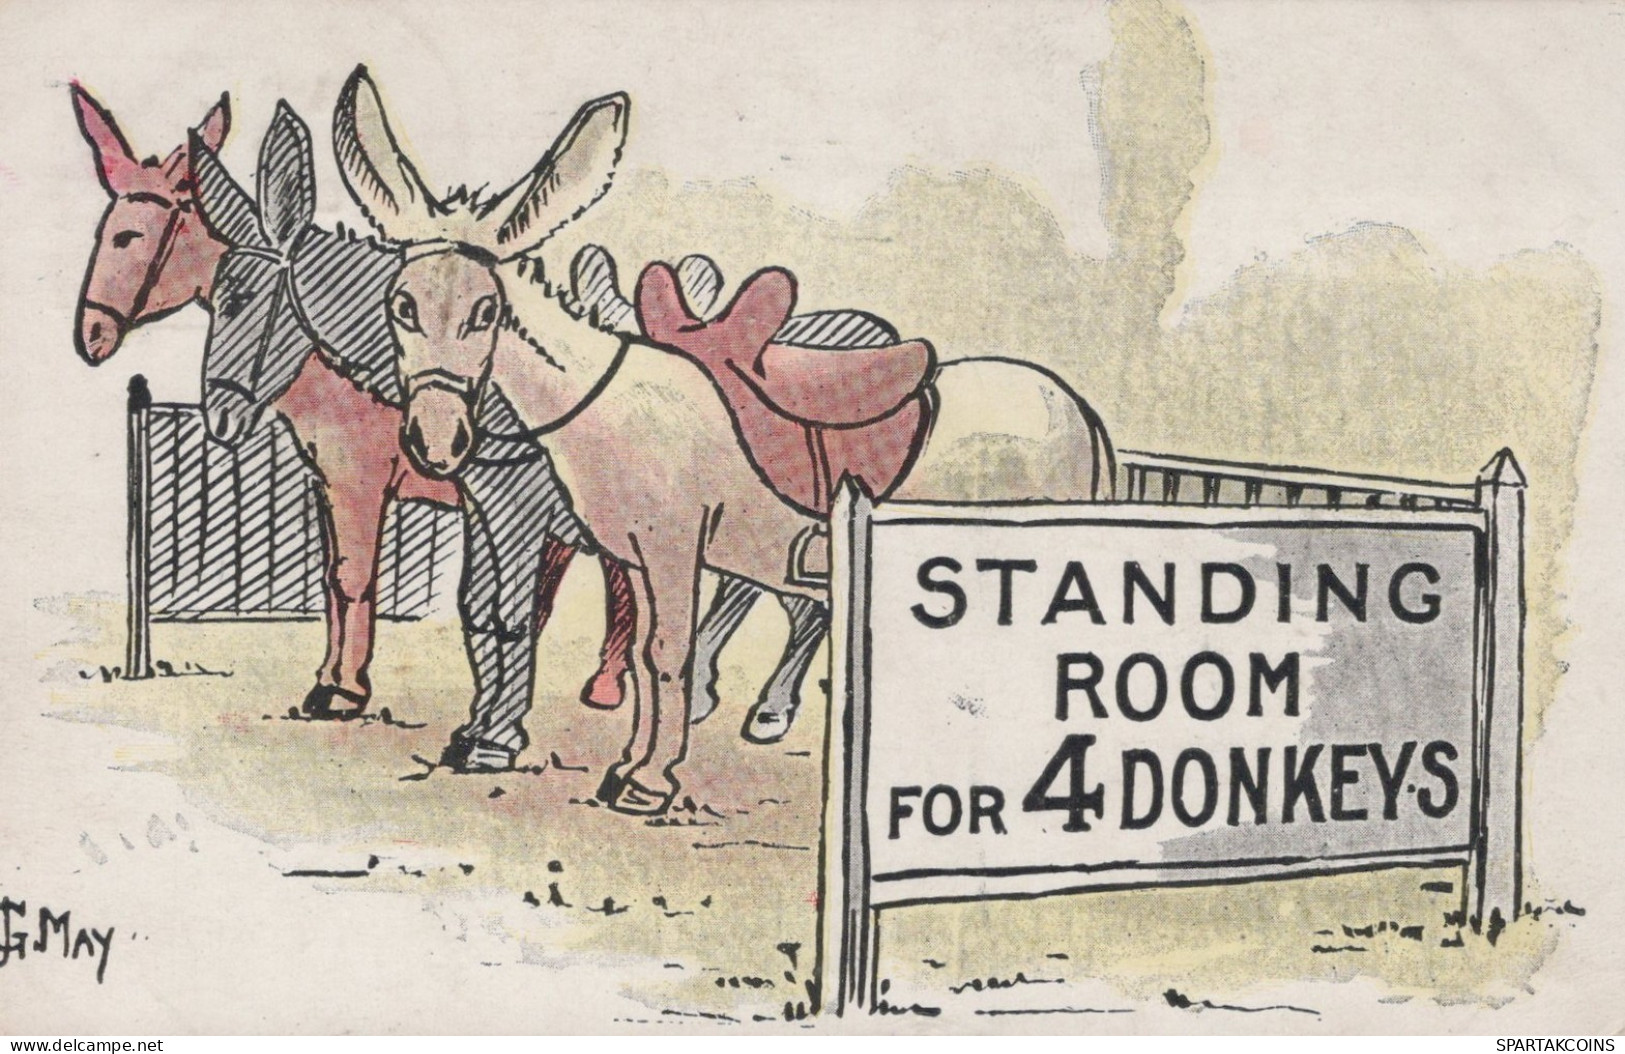 DONKEY Animals Vintage Antique Old CPA Postcard #PAA306.GB - Anes